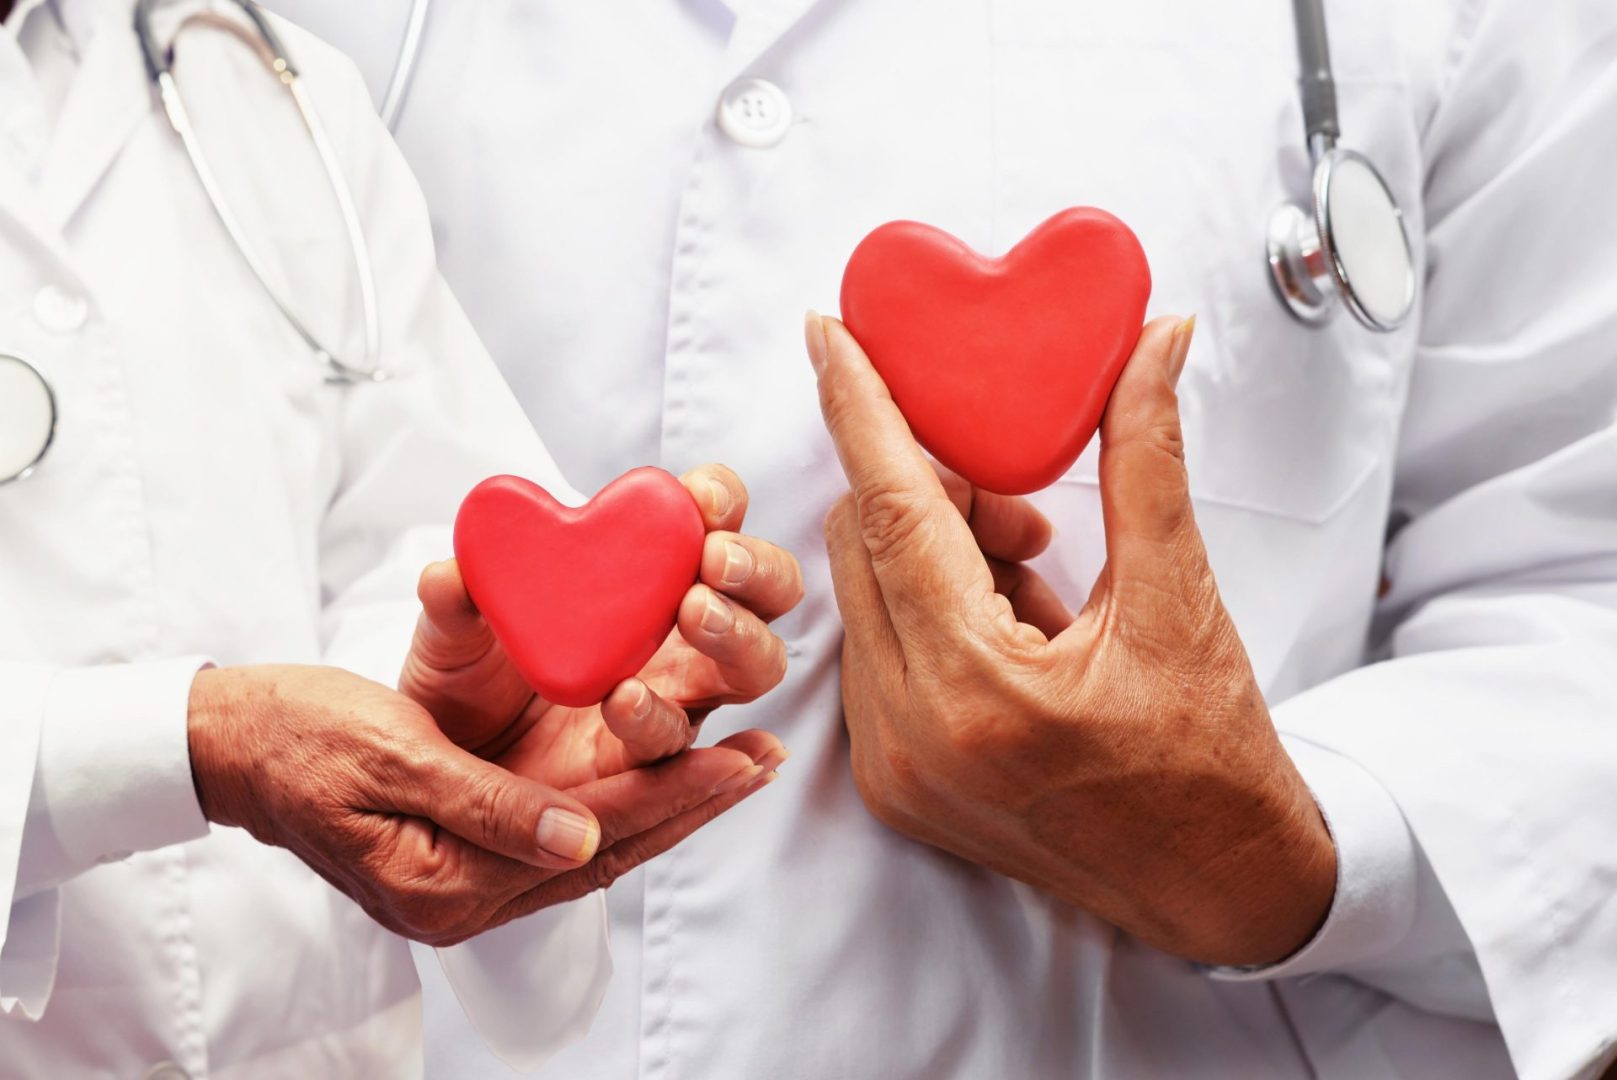 two doctors holding red heart shaped objects in their hands